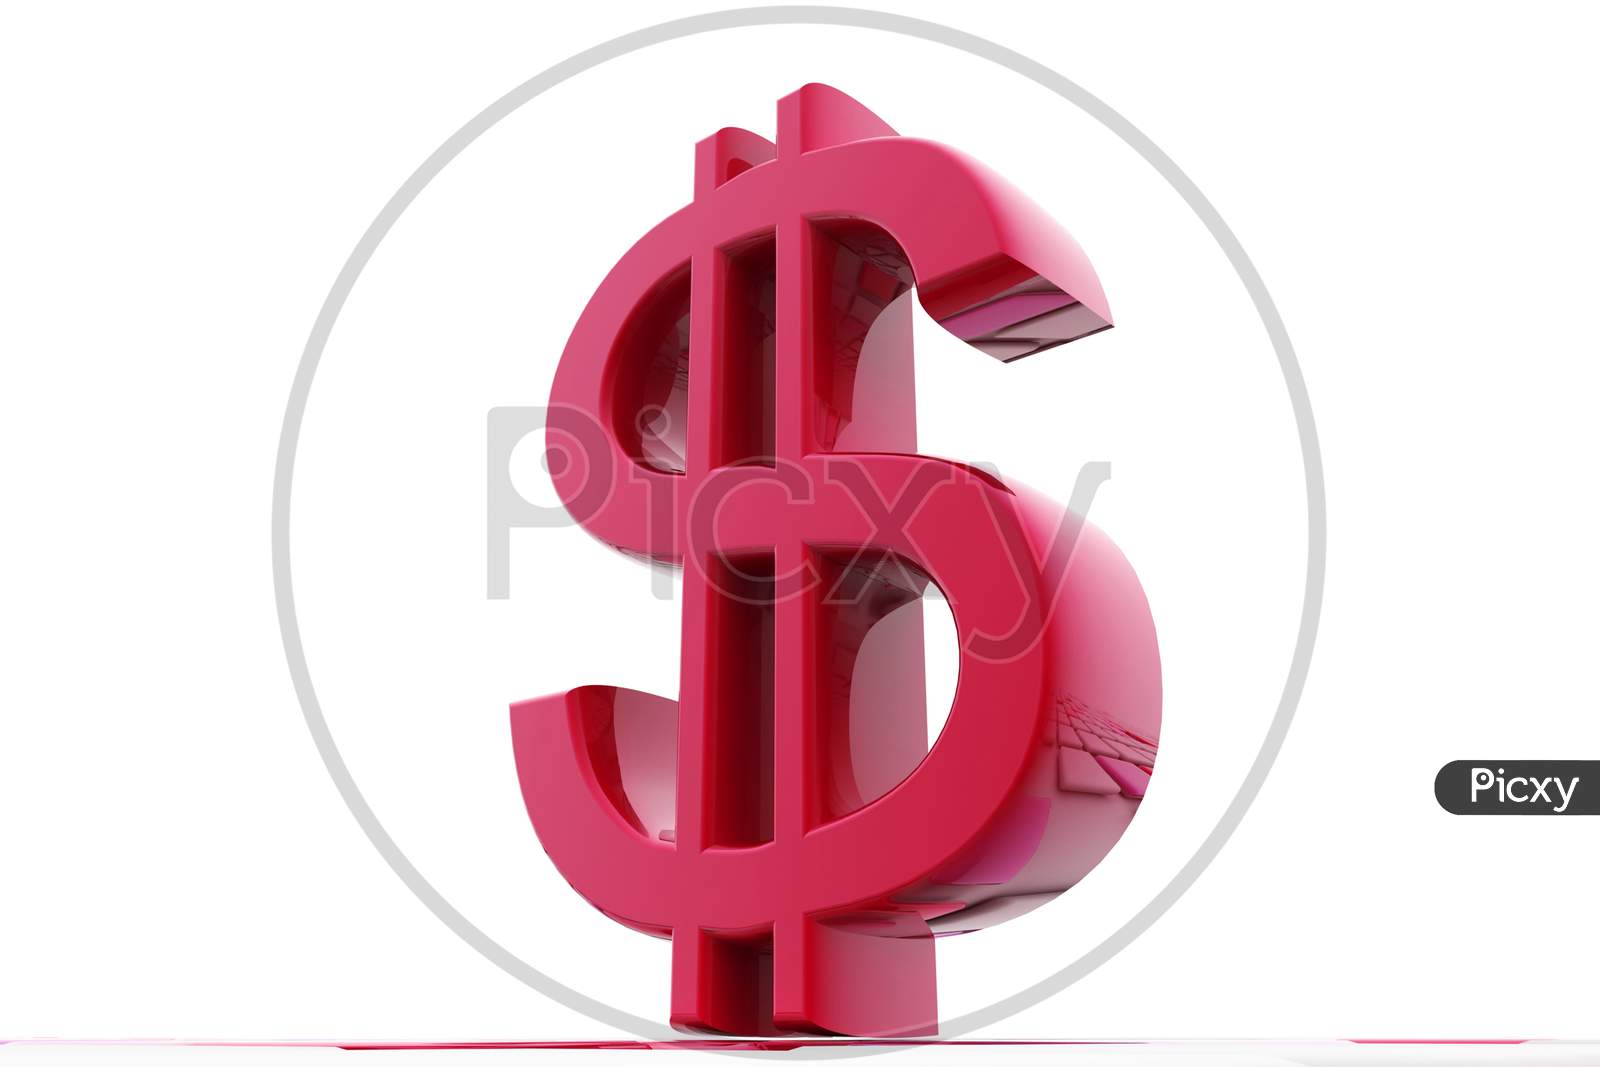 Dollar Currency Symbol on White Background